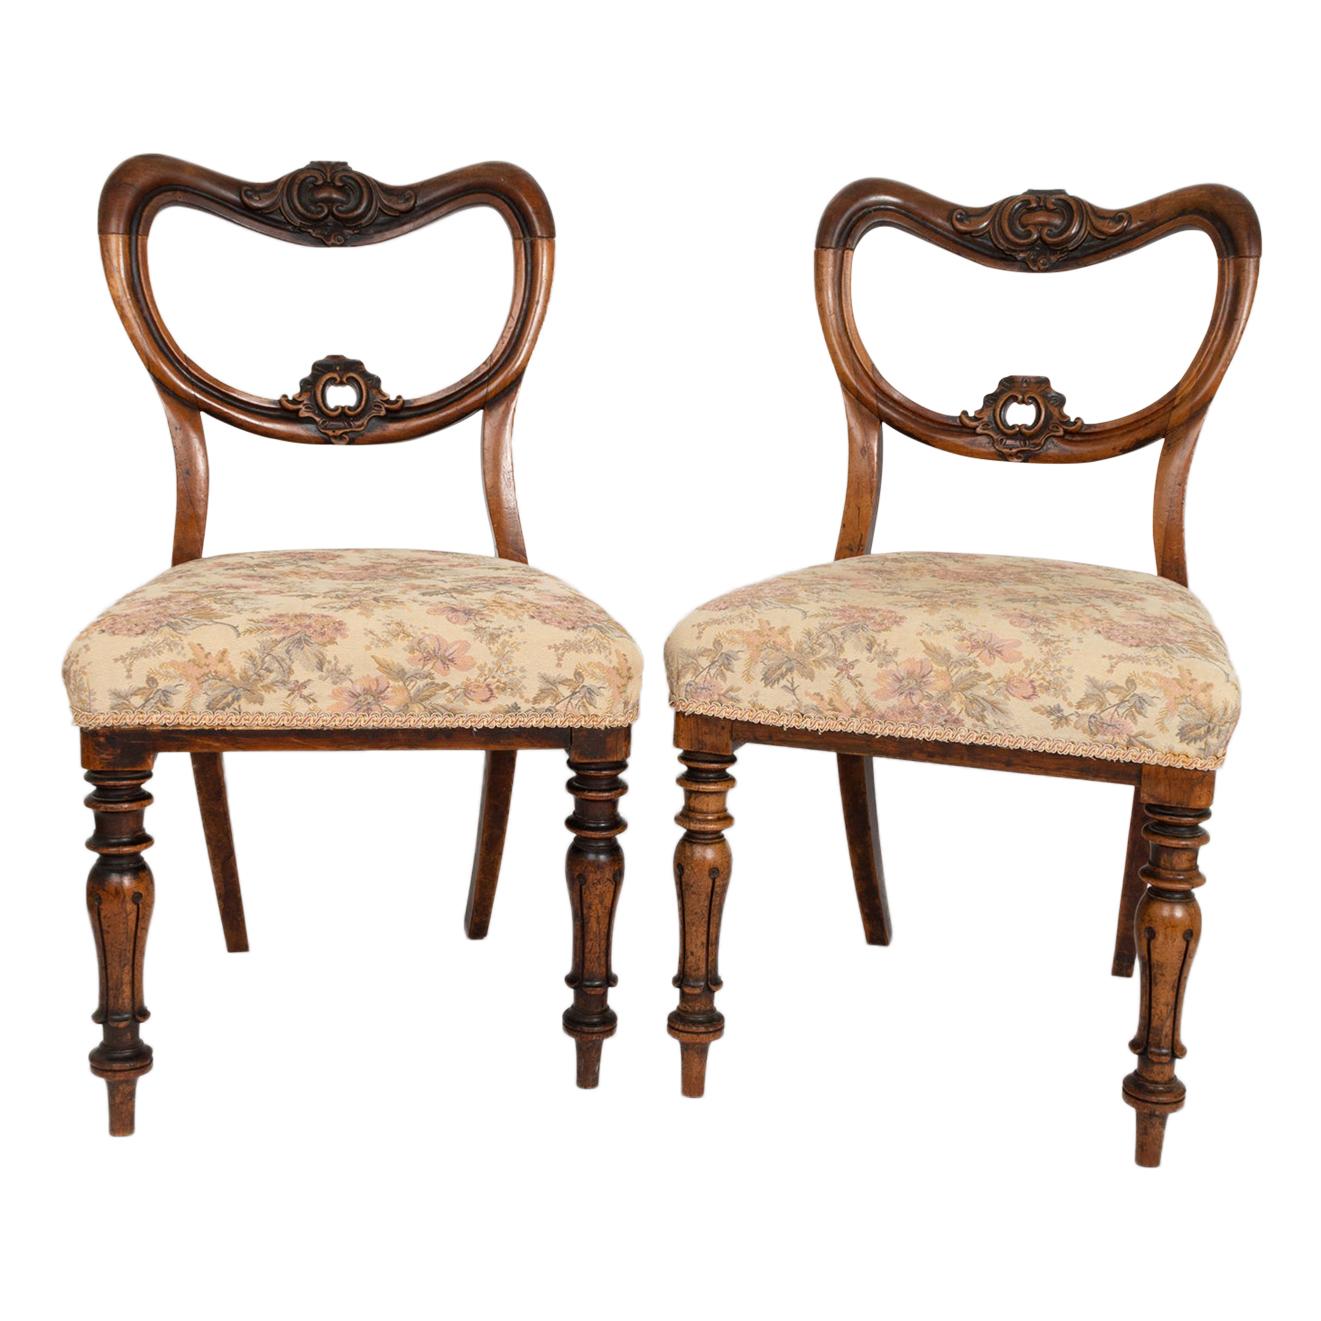 Pair of Antique William IV Walnut Balloon Back Chairs, England, circa 1835 For Sale